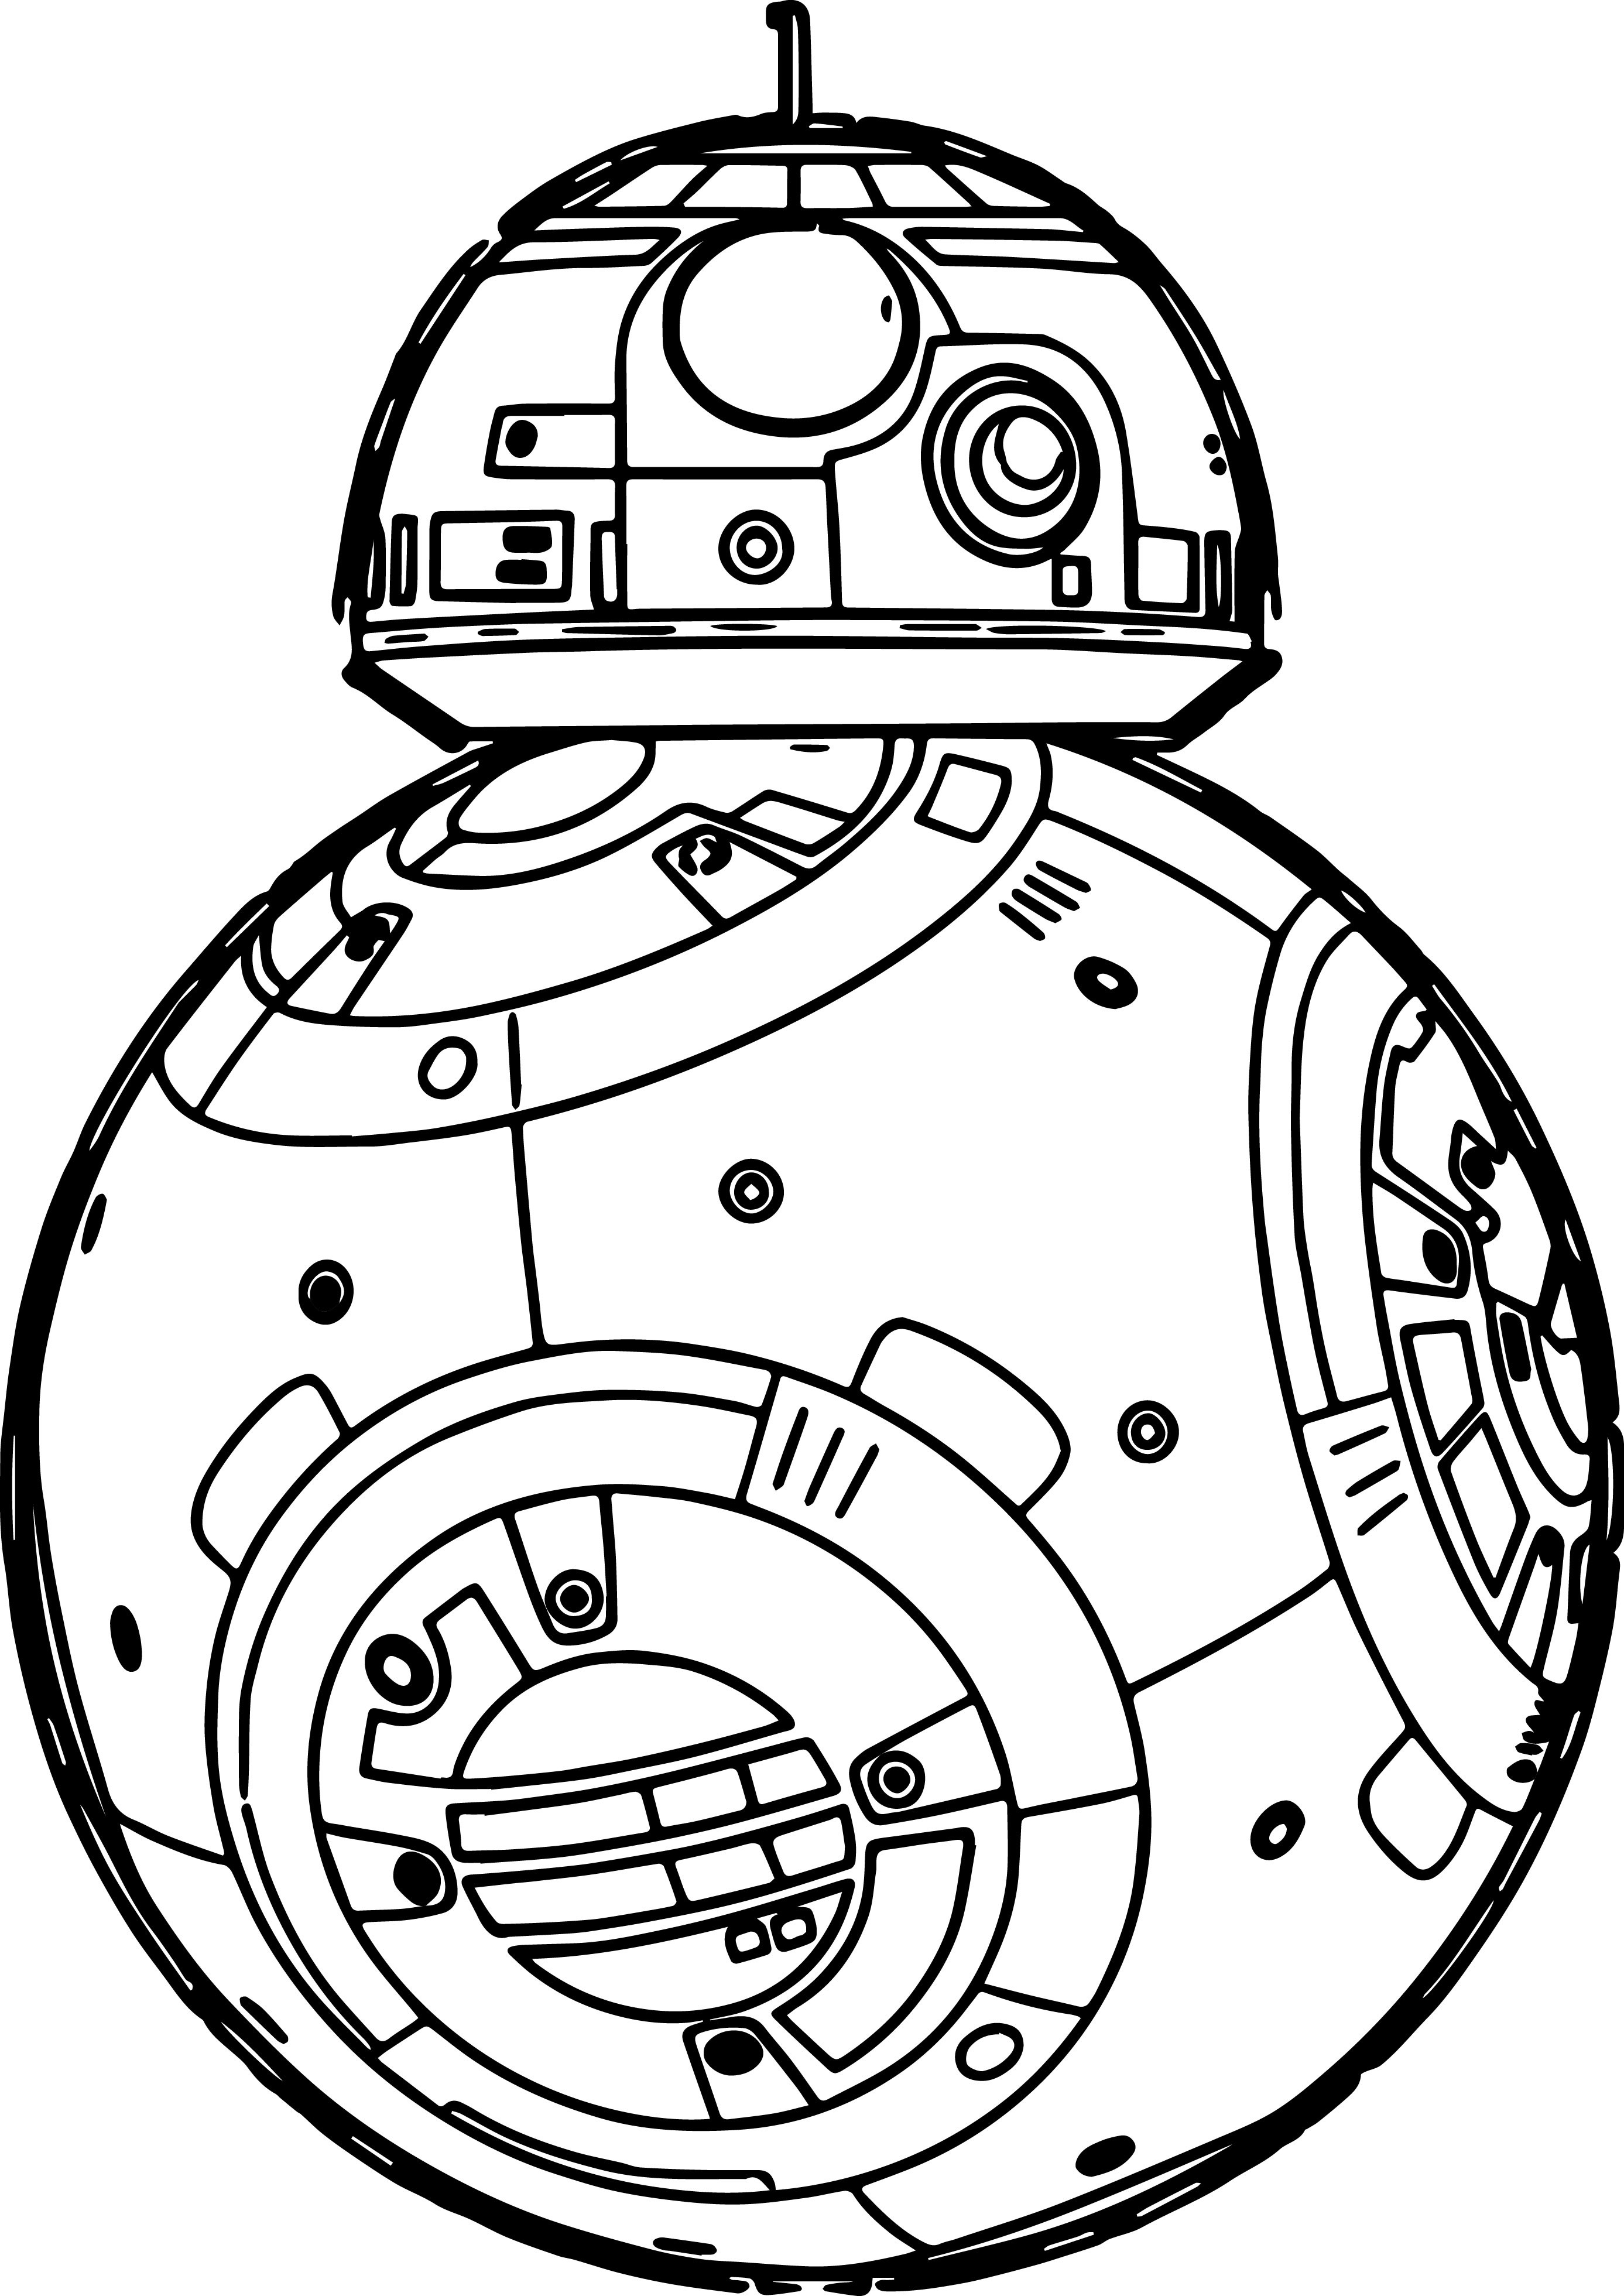 Coloring Pages Of Star Wars
 Star Wars The Force Awakens Coloring Pages